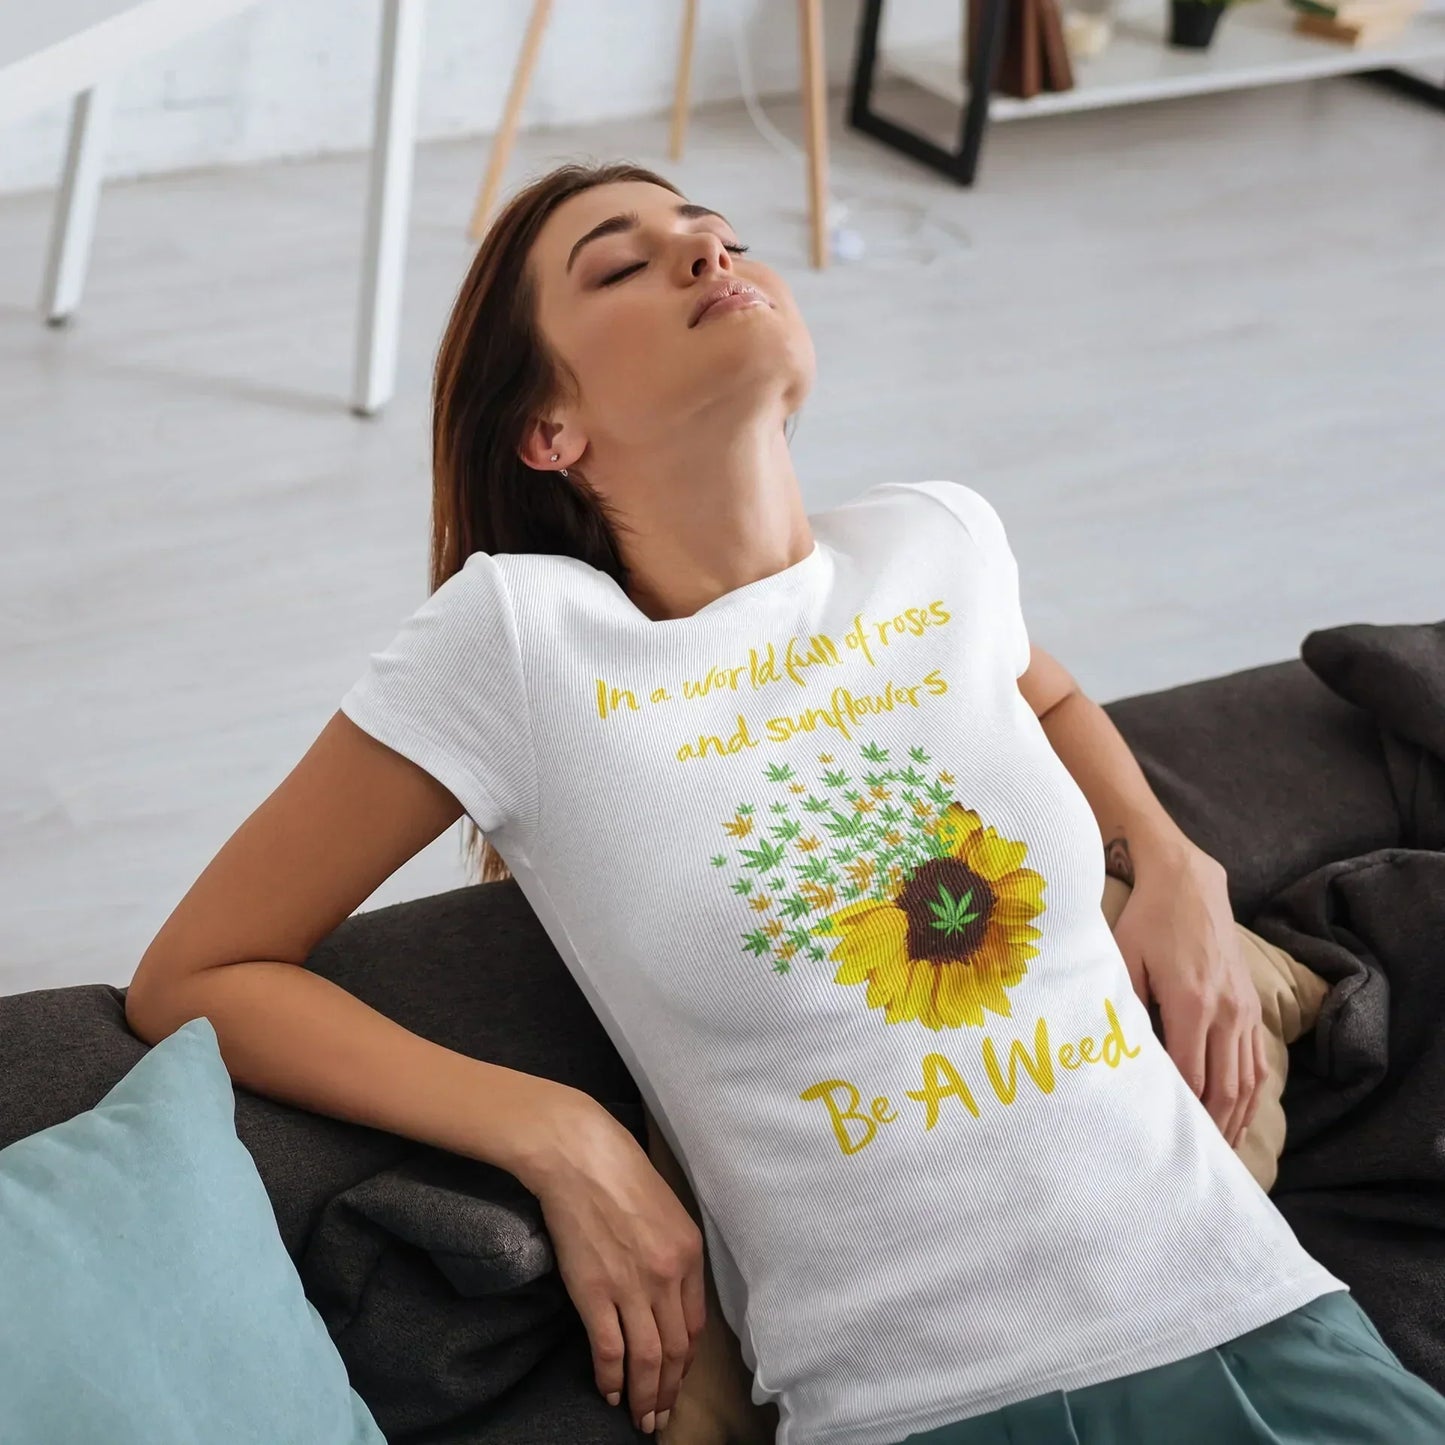 In a World Full of Roses Be a Weed, Sarcastic Stoner Shirt HMDesignStudioUS